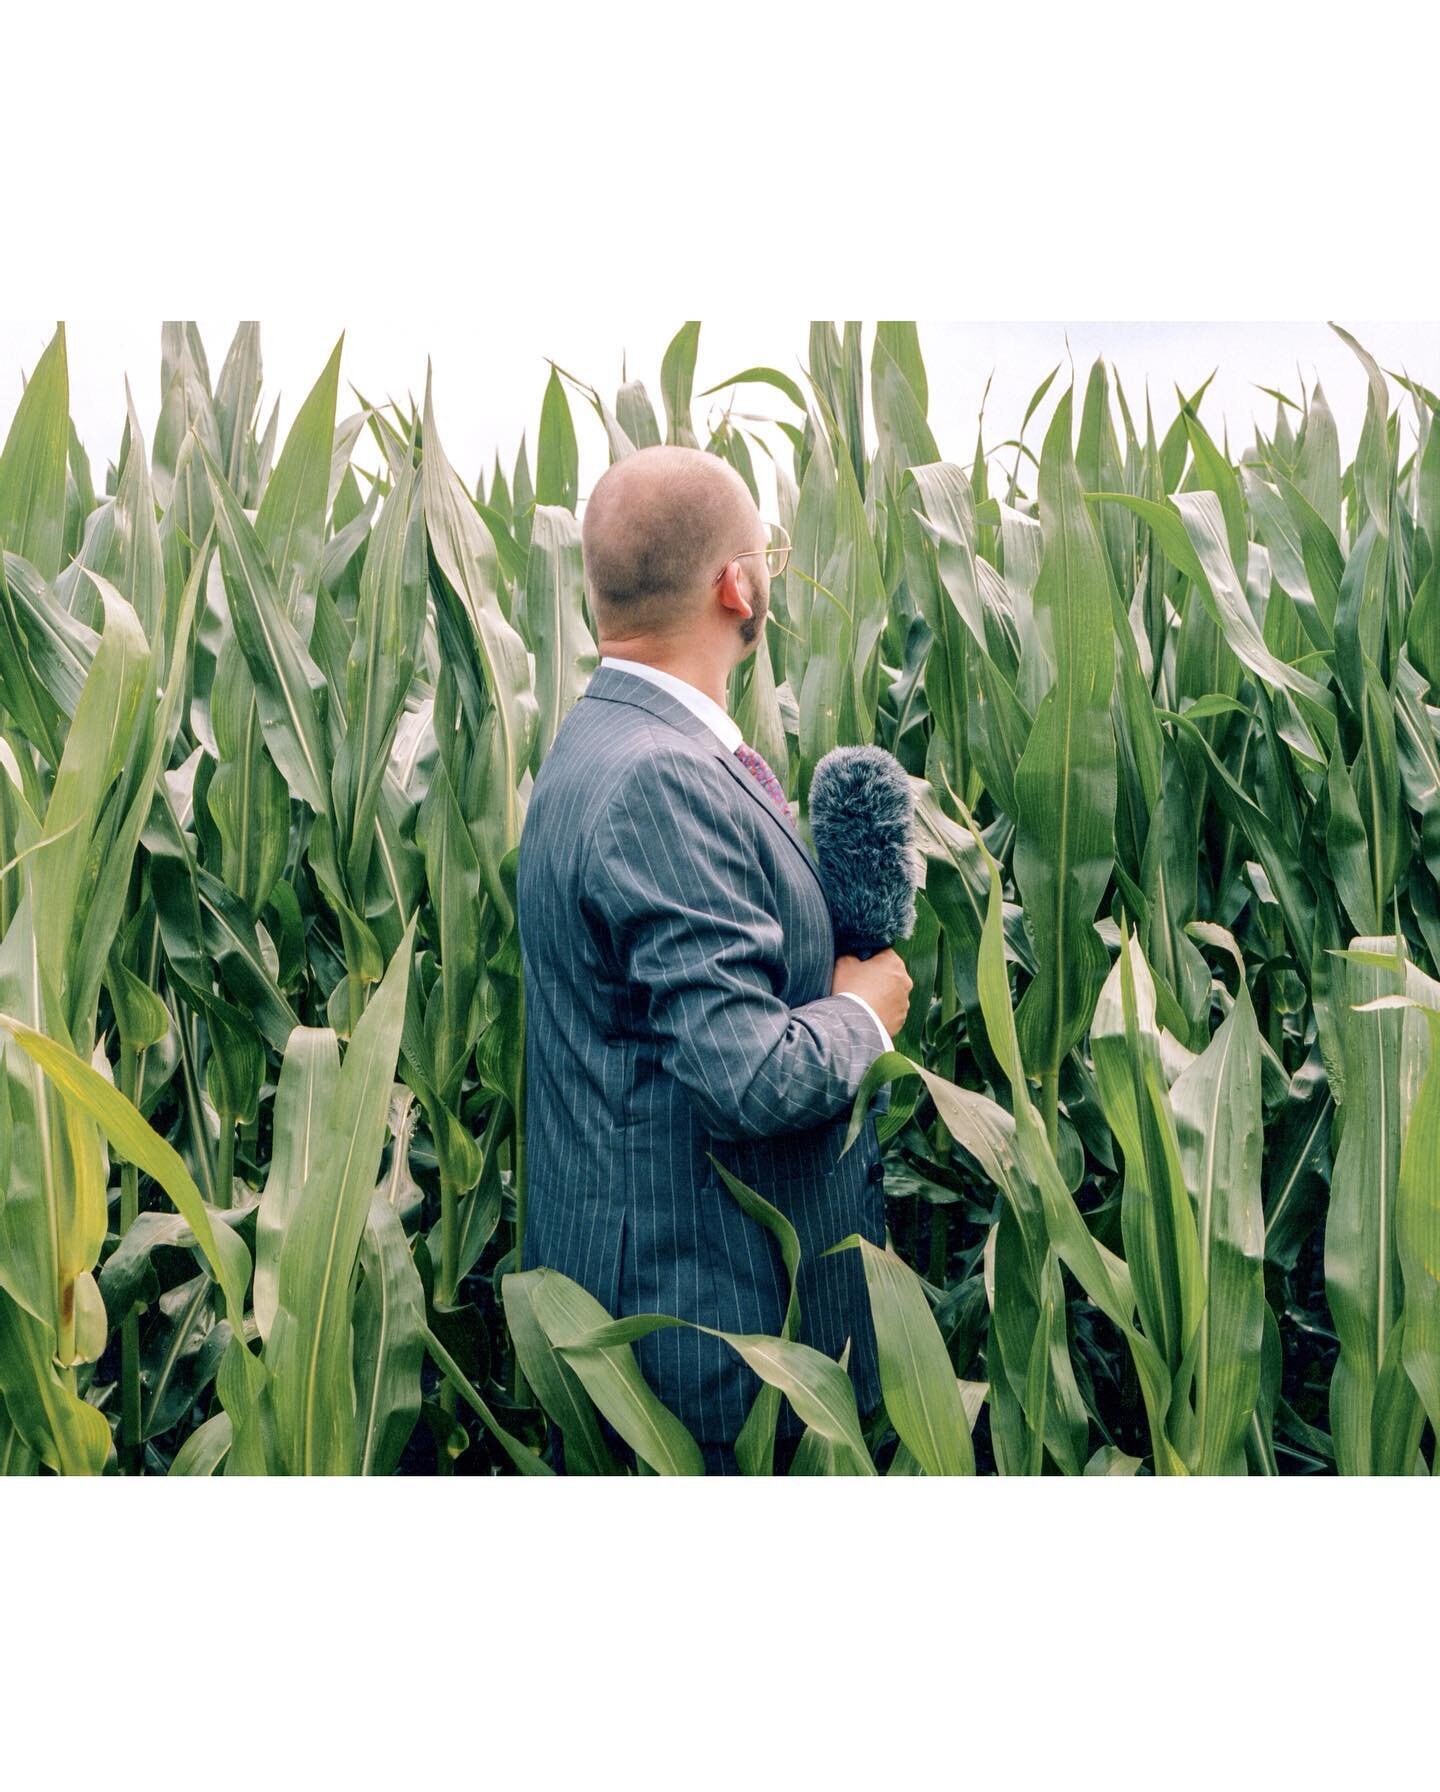 Happy new year!
Make sure to eat your veggies and not look back in 2021 🌽

Outtakes of @wouterhidding at the &lsquo;MEN IN THE WALL&rsquo; video shoot. 

#mamiya645 #kodakportra400 #cornfields #milomusic #photography #musicvideo #newsreporter #field